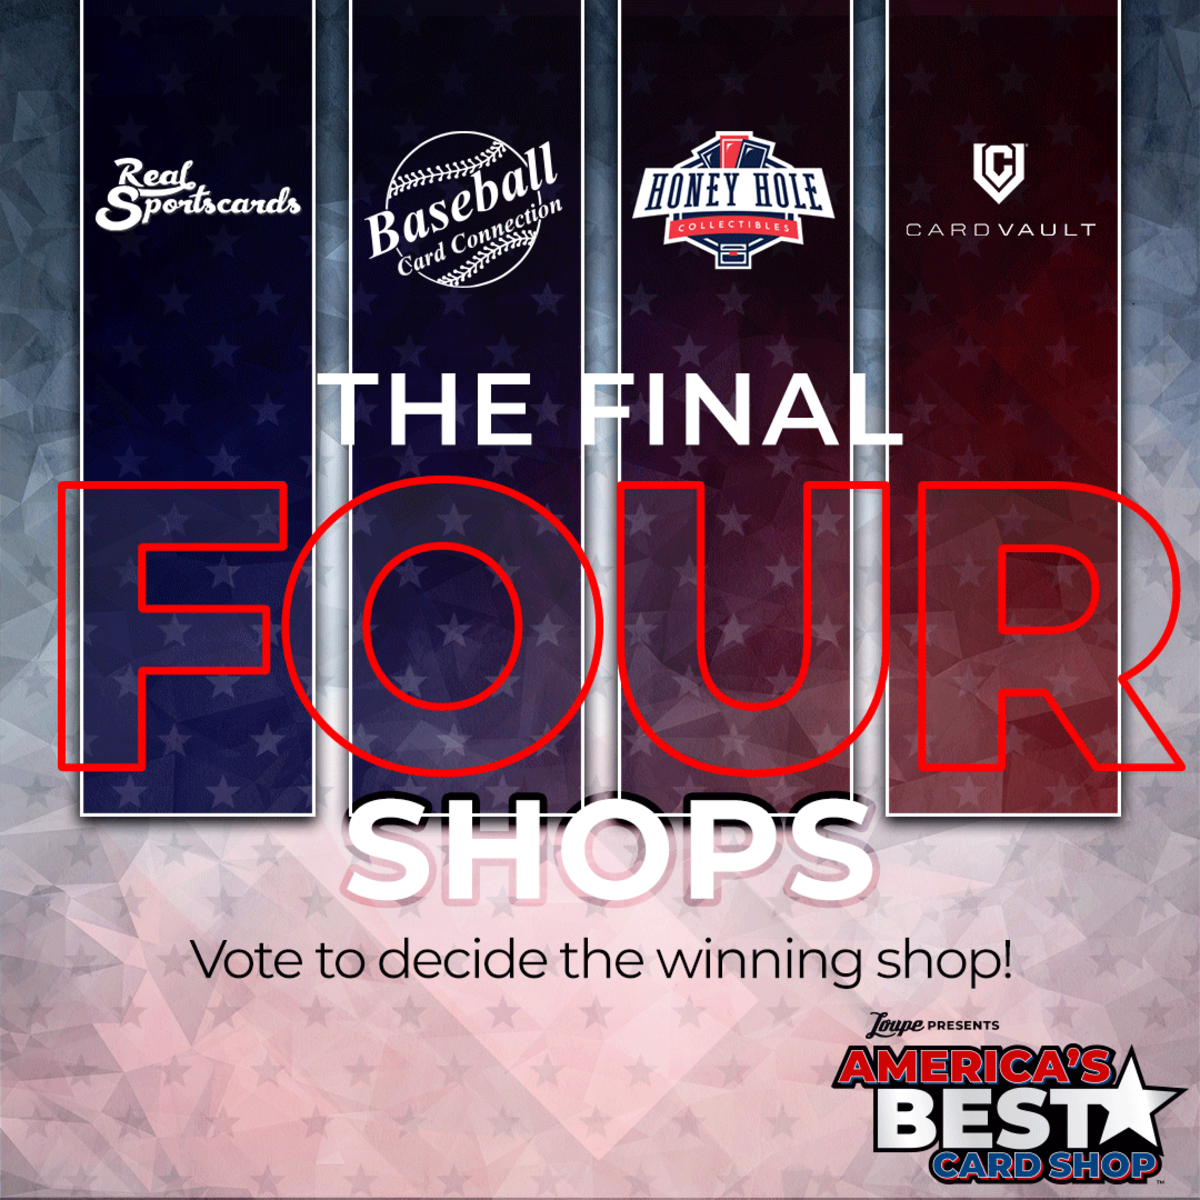 The finalist for the "America's Best Card Shop" contest.